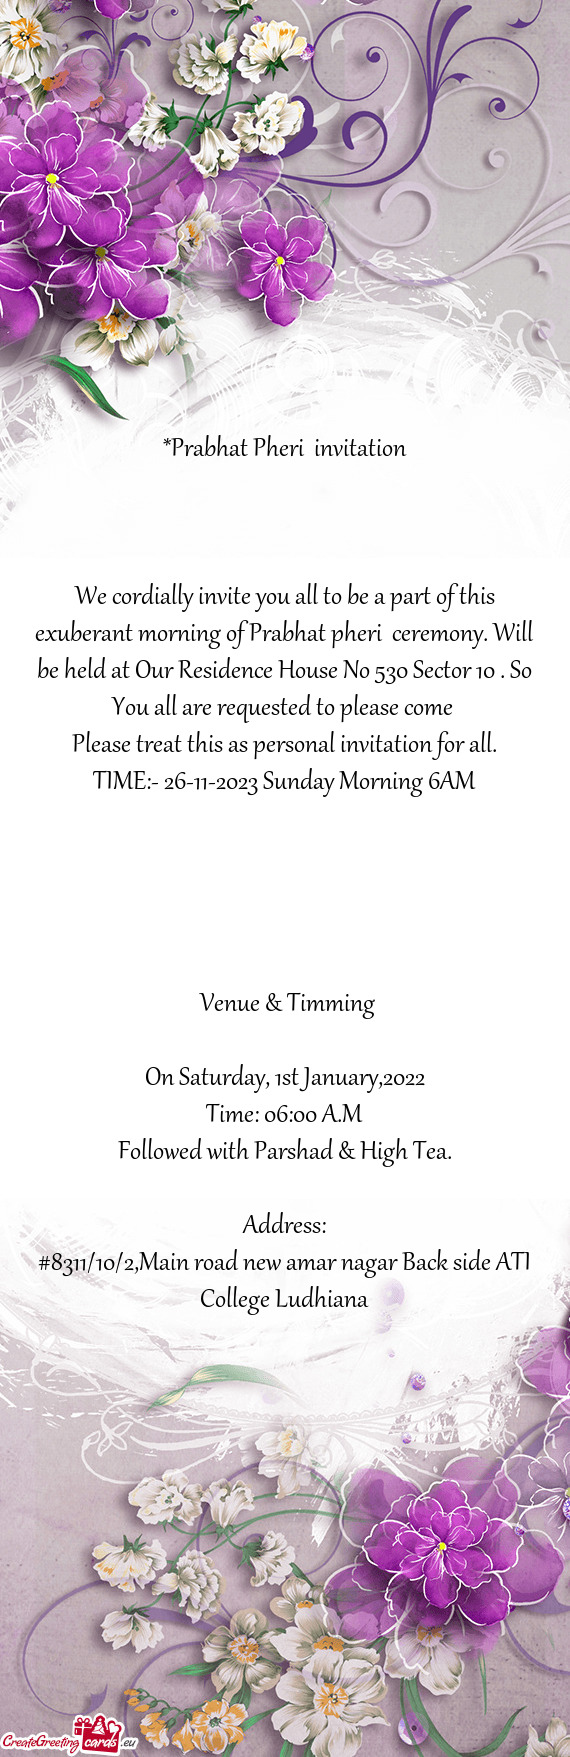 Be held at Our Residence House No 530 Sector 10 . So You all are requested to please come